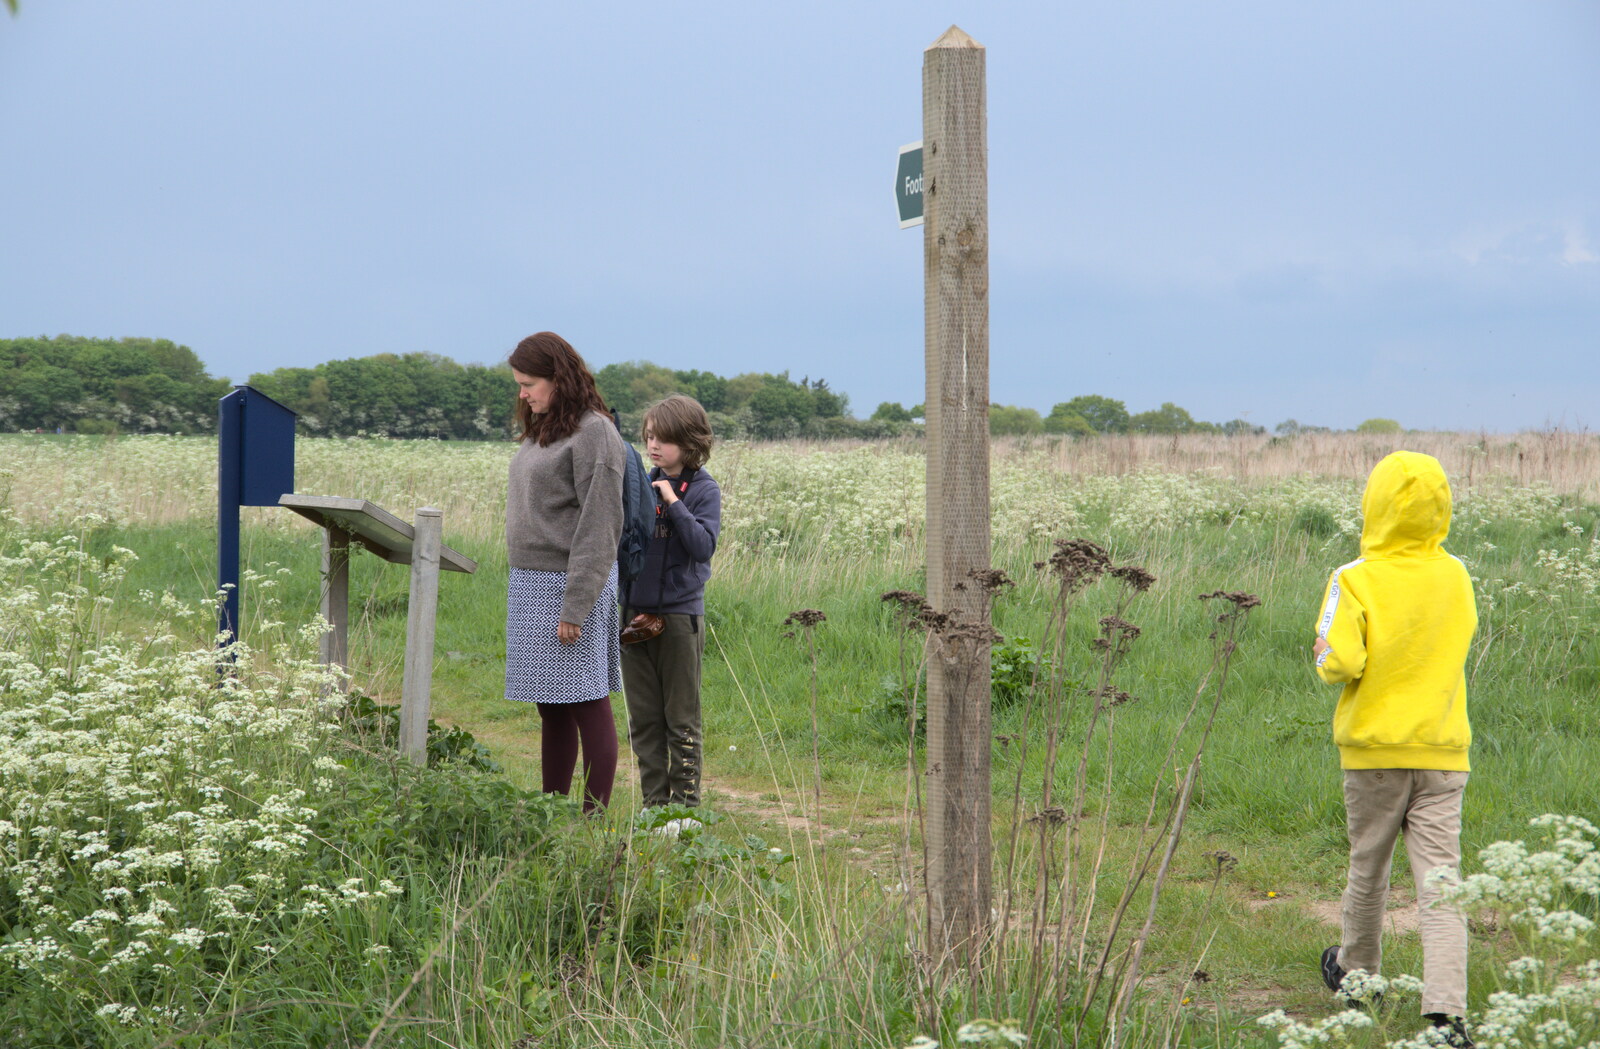 Isobel reads one of the airfield information boards from The Quest for Rapsy Tapsy Lane, Eye, Suffolk - 6th May 2020